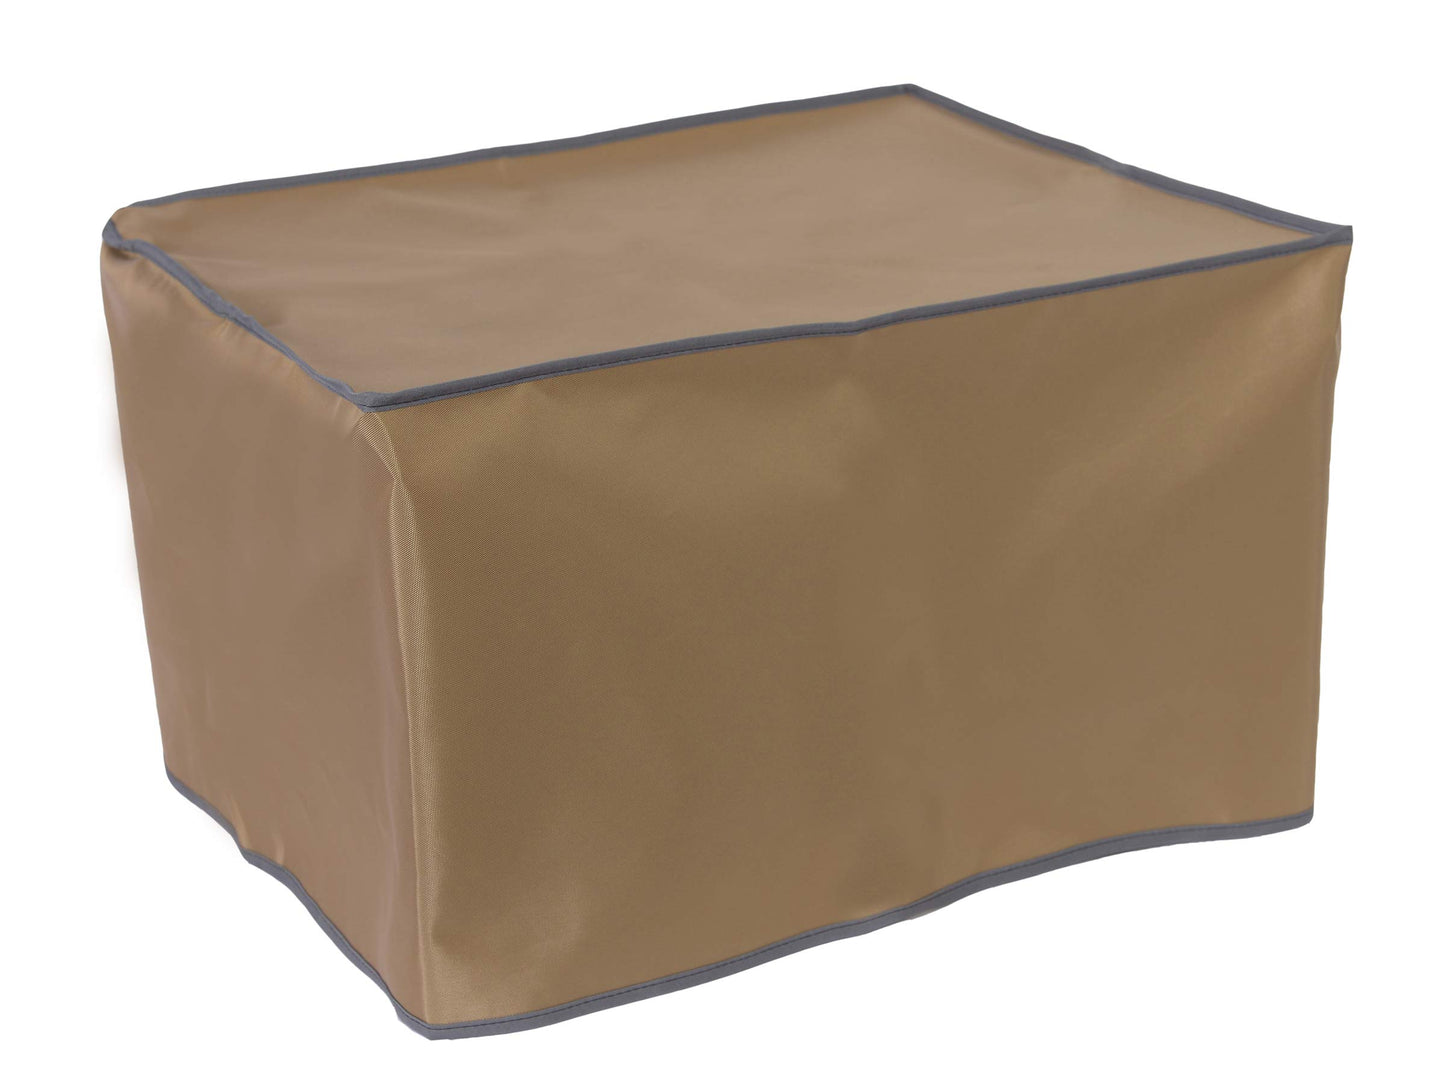 The Perfect Dust Cover, Tan Nylon Cover for HP Laserjet Pro MFP M126nw Laser Printer, Anti Static and Waterproof Cover Dimensions 16.6''W x 14.4''D x 10''H by The Perfect Dust Cover LLC